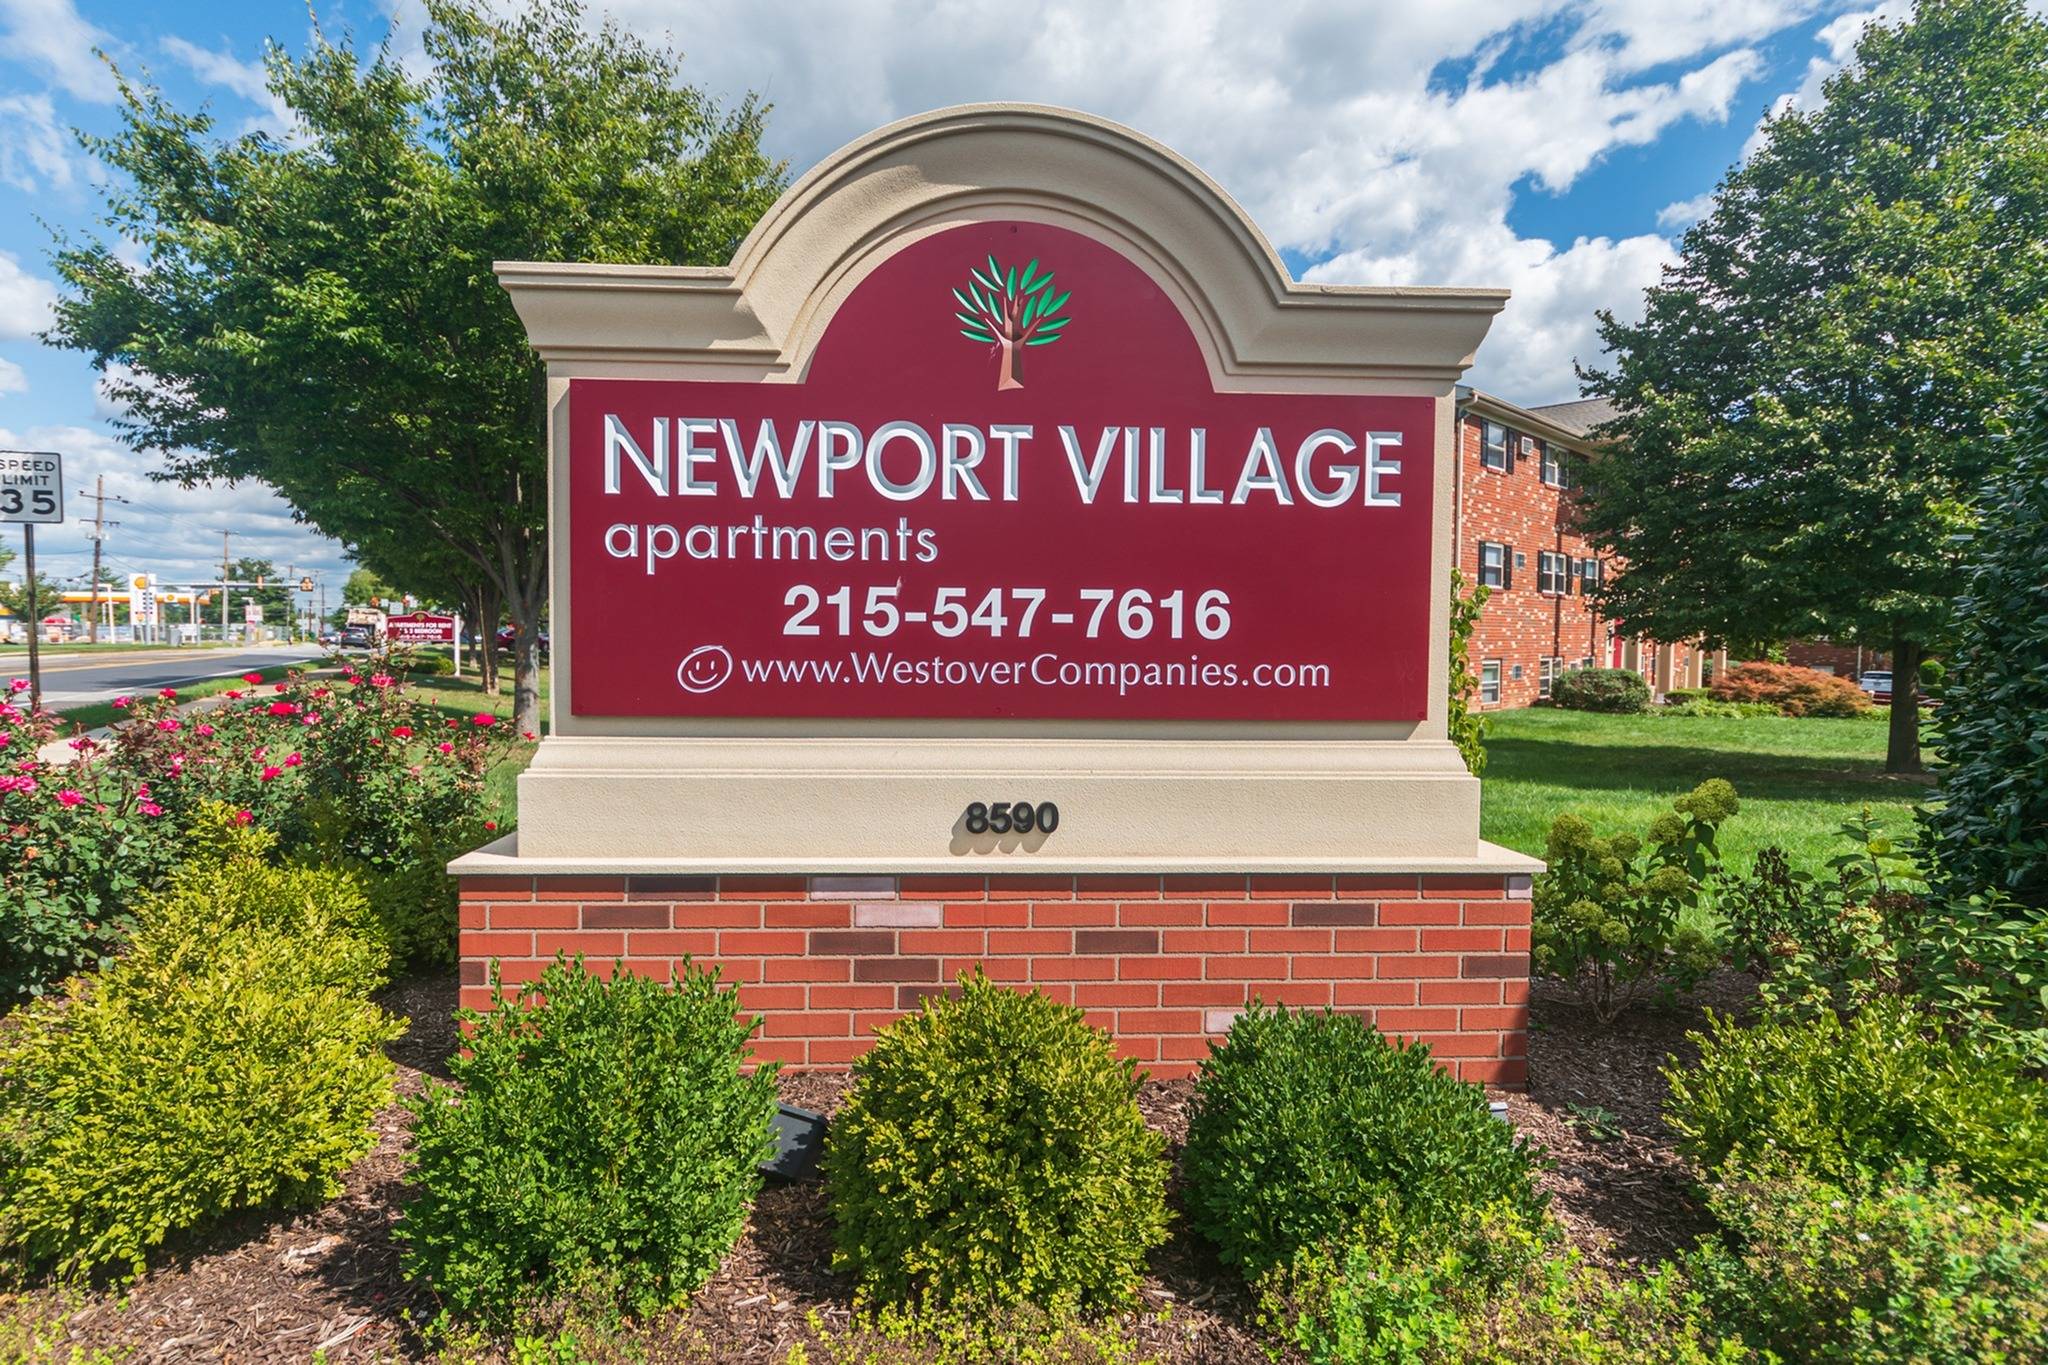 Newport Village Apartments sign with shrubs around the sign.